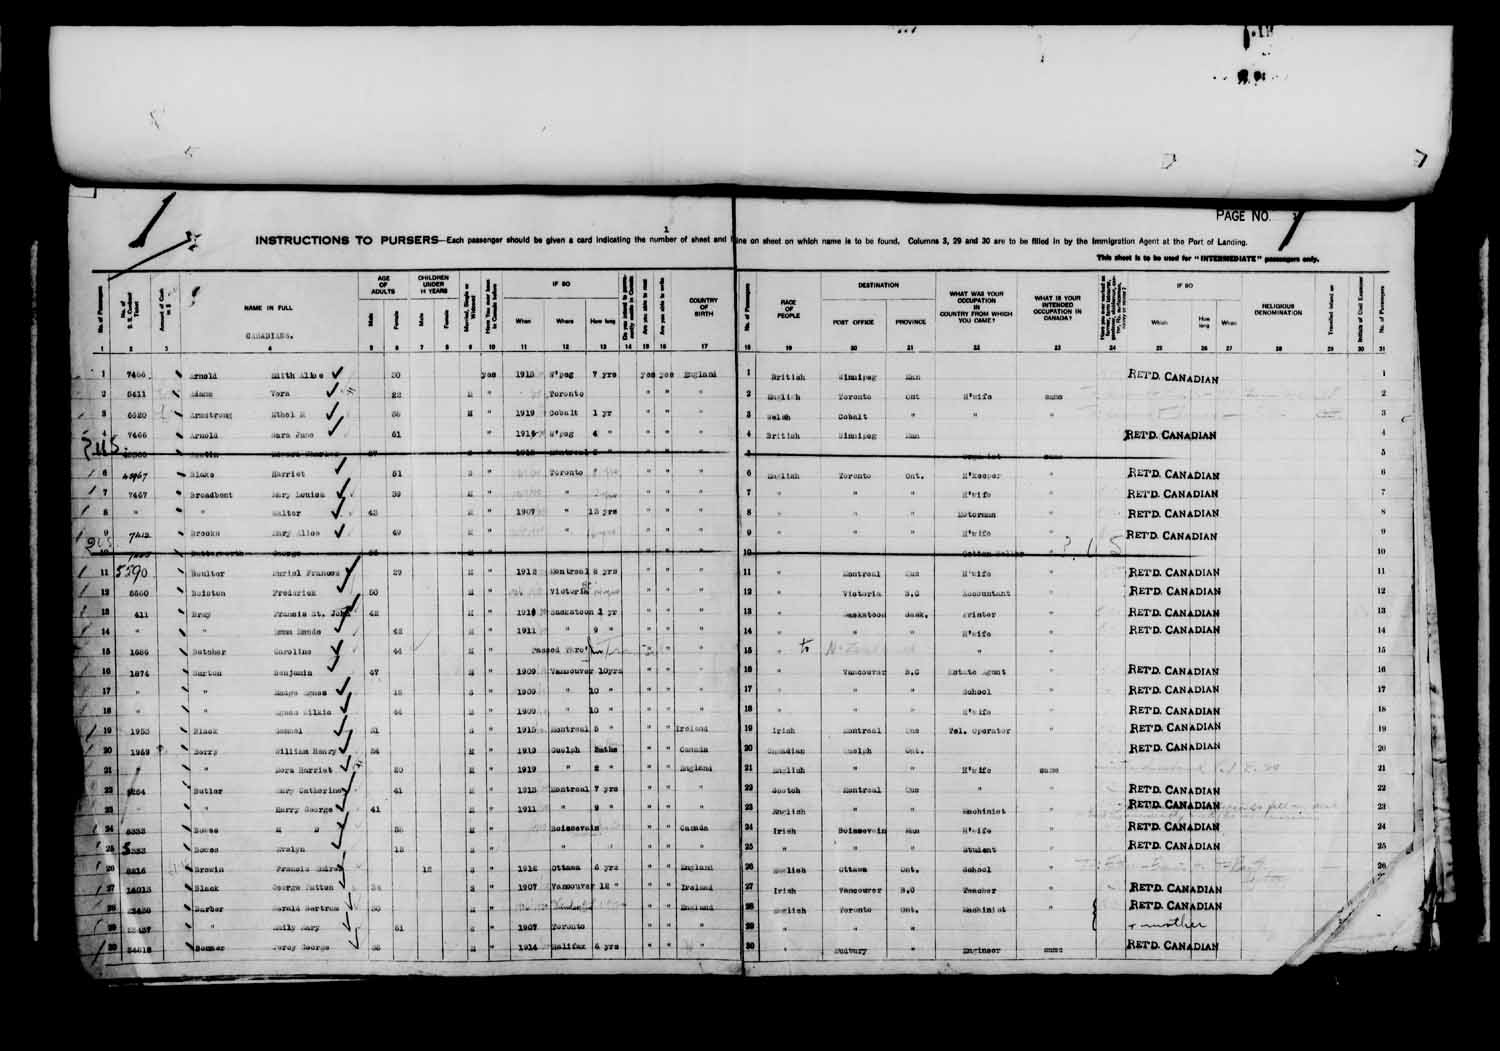 Digitized page of Passenger Lists for Image No.: e003610608